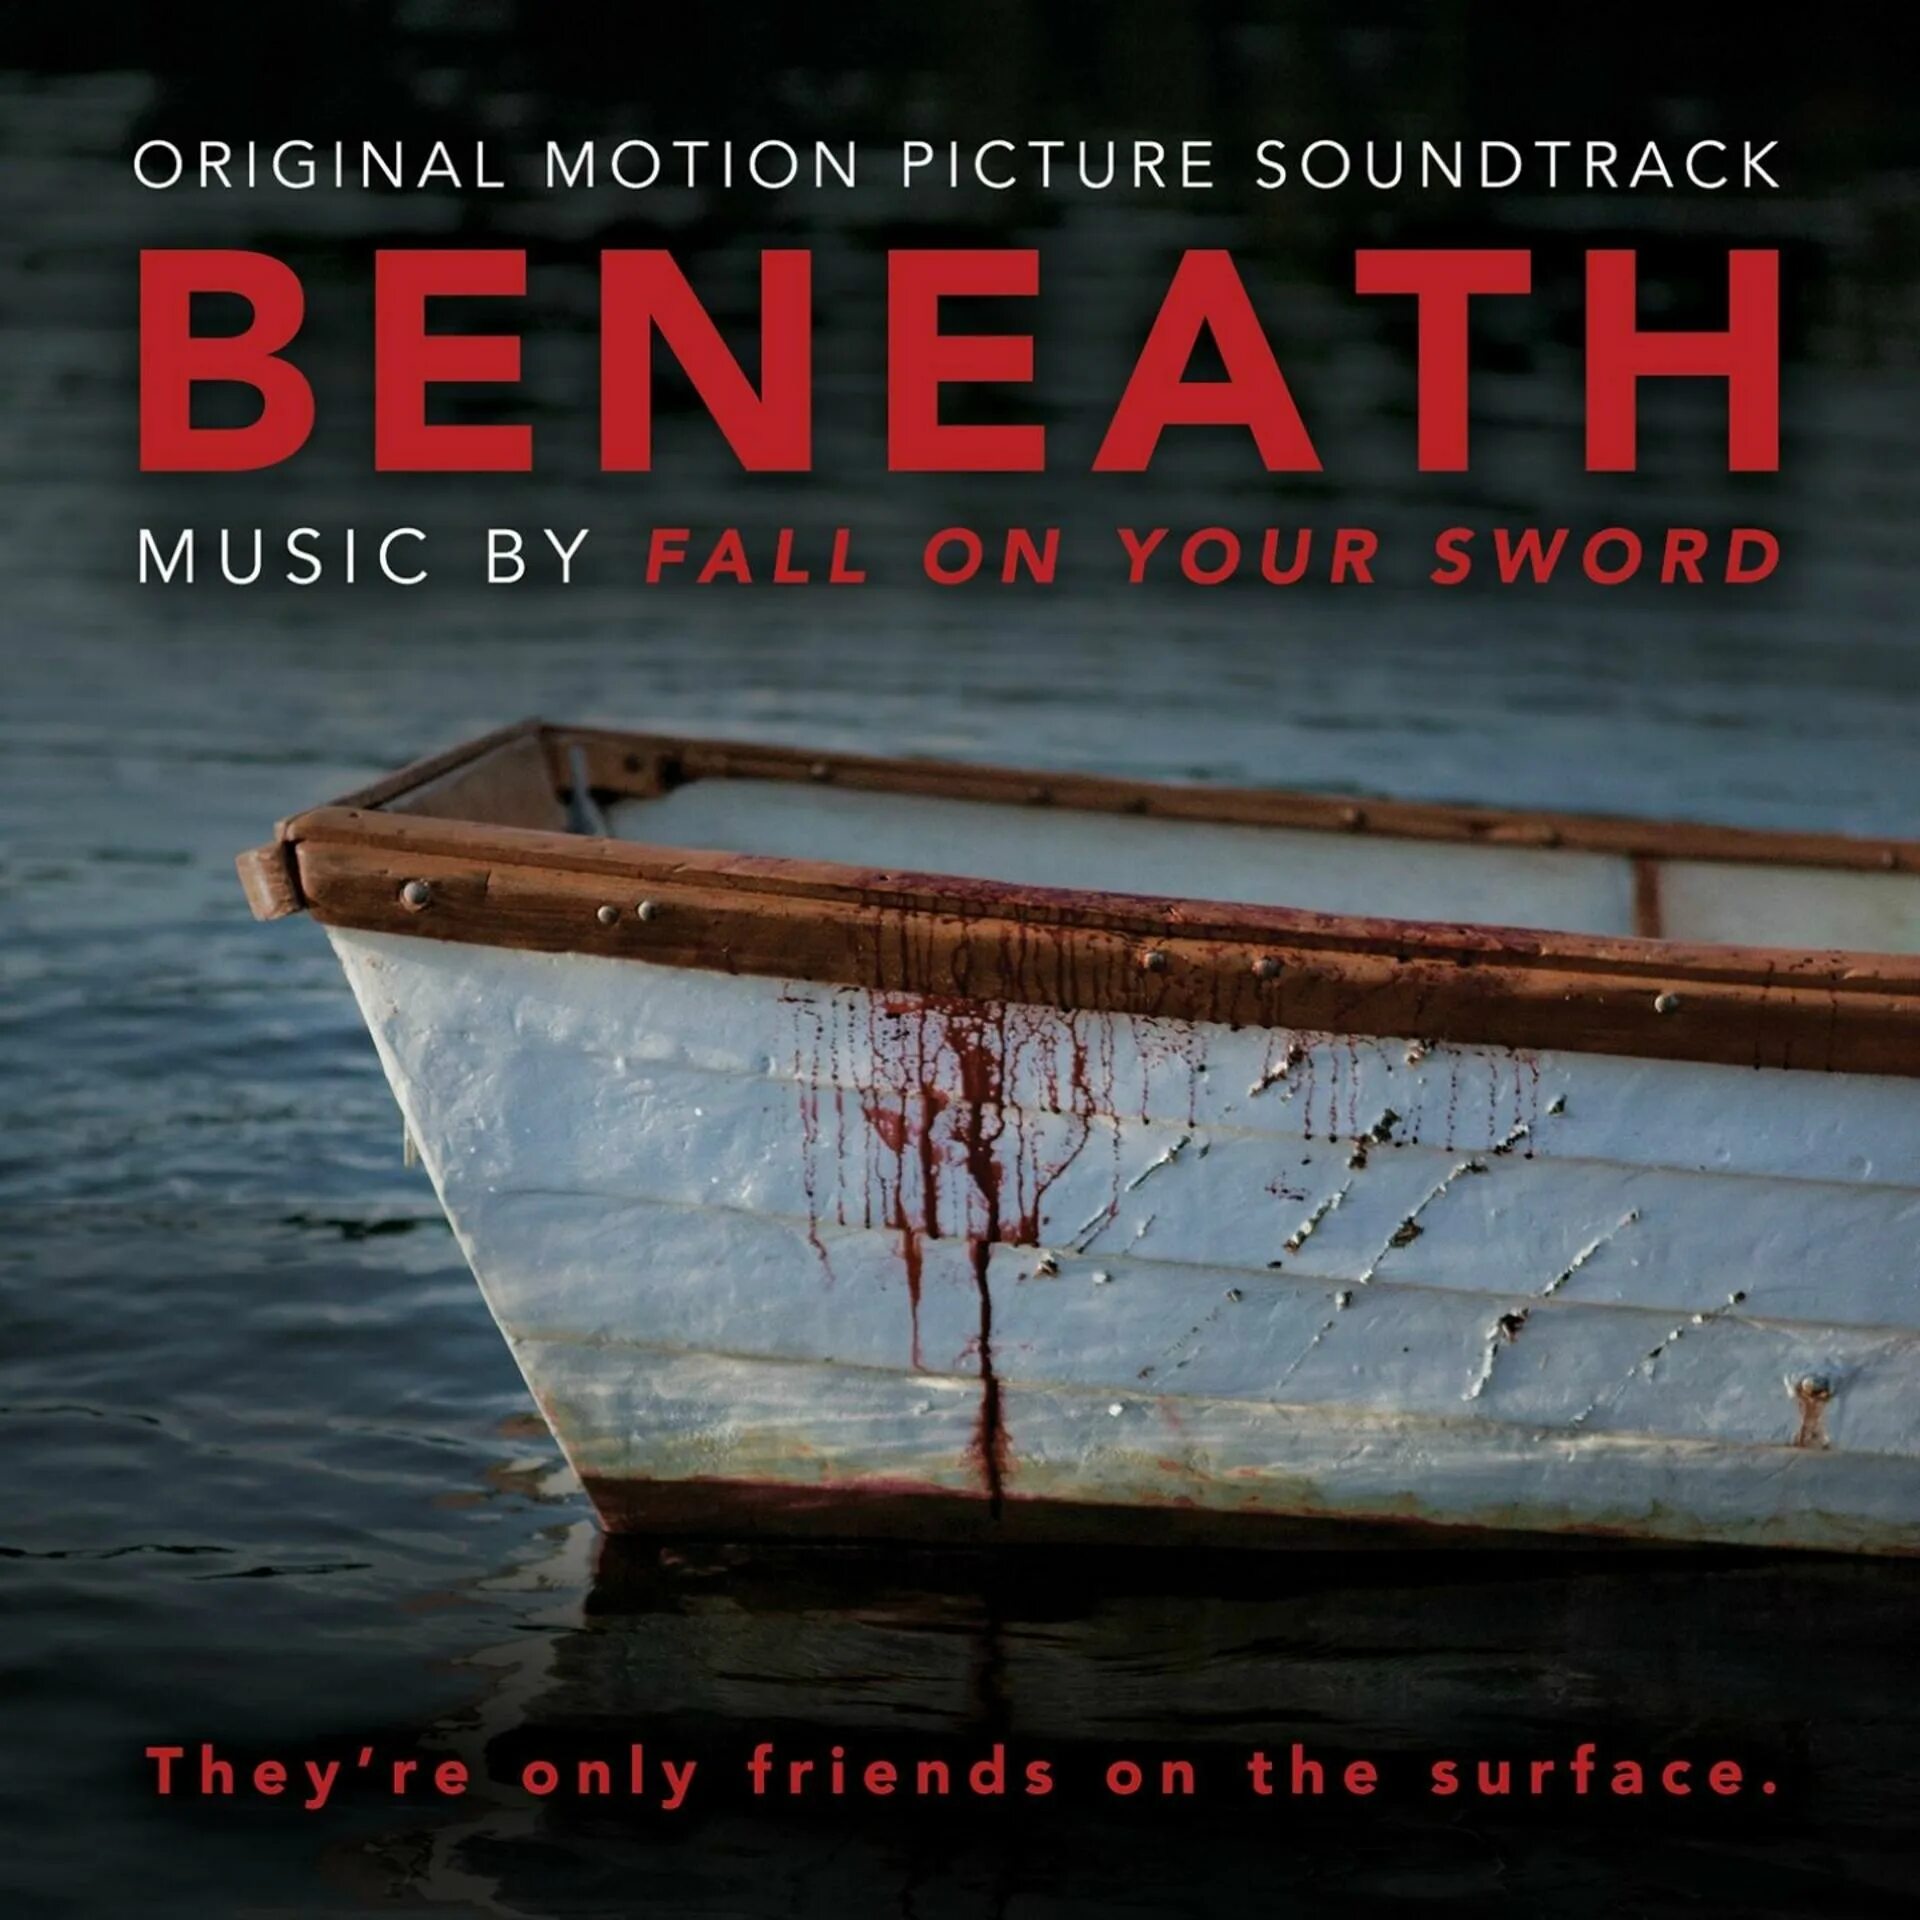 Fall on your Sword another Earth. Fall soundtrack